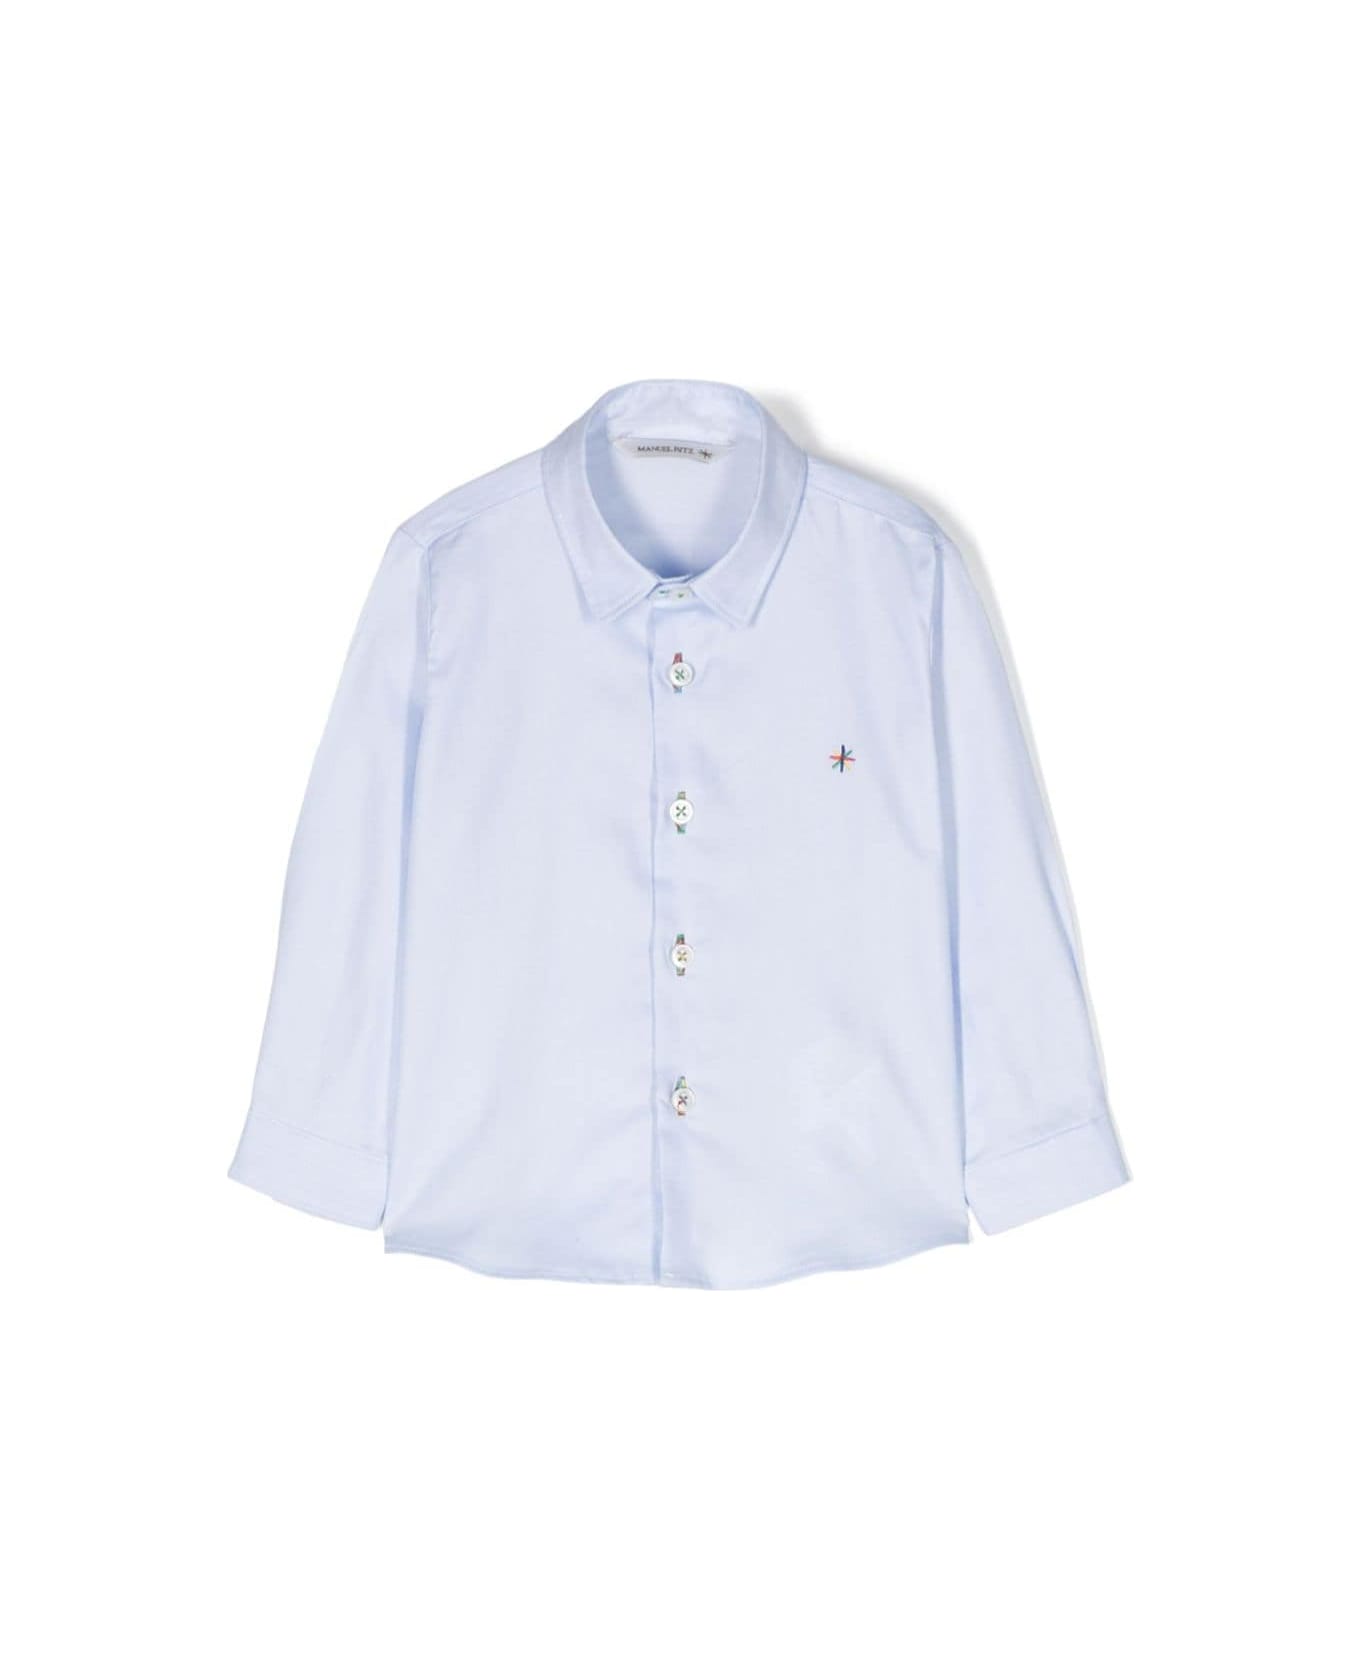 Manuel Ritz Shirt With Embroidery - Light front